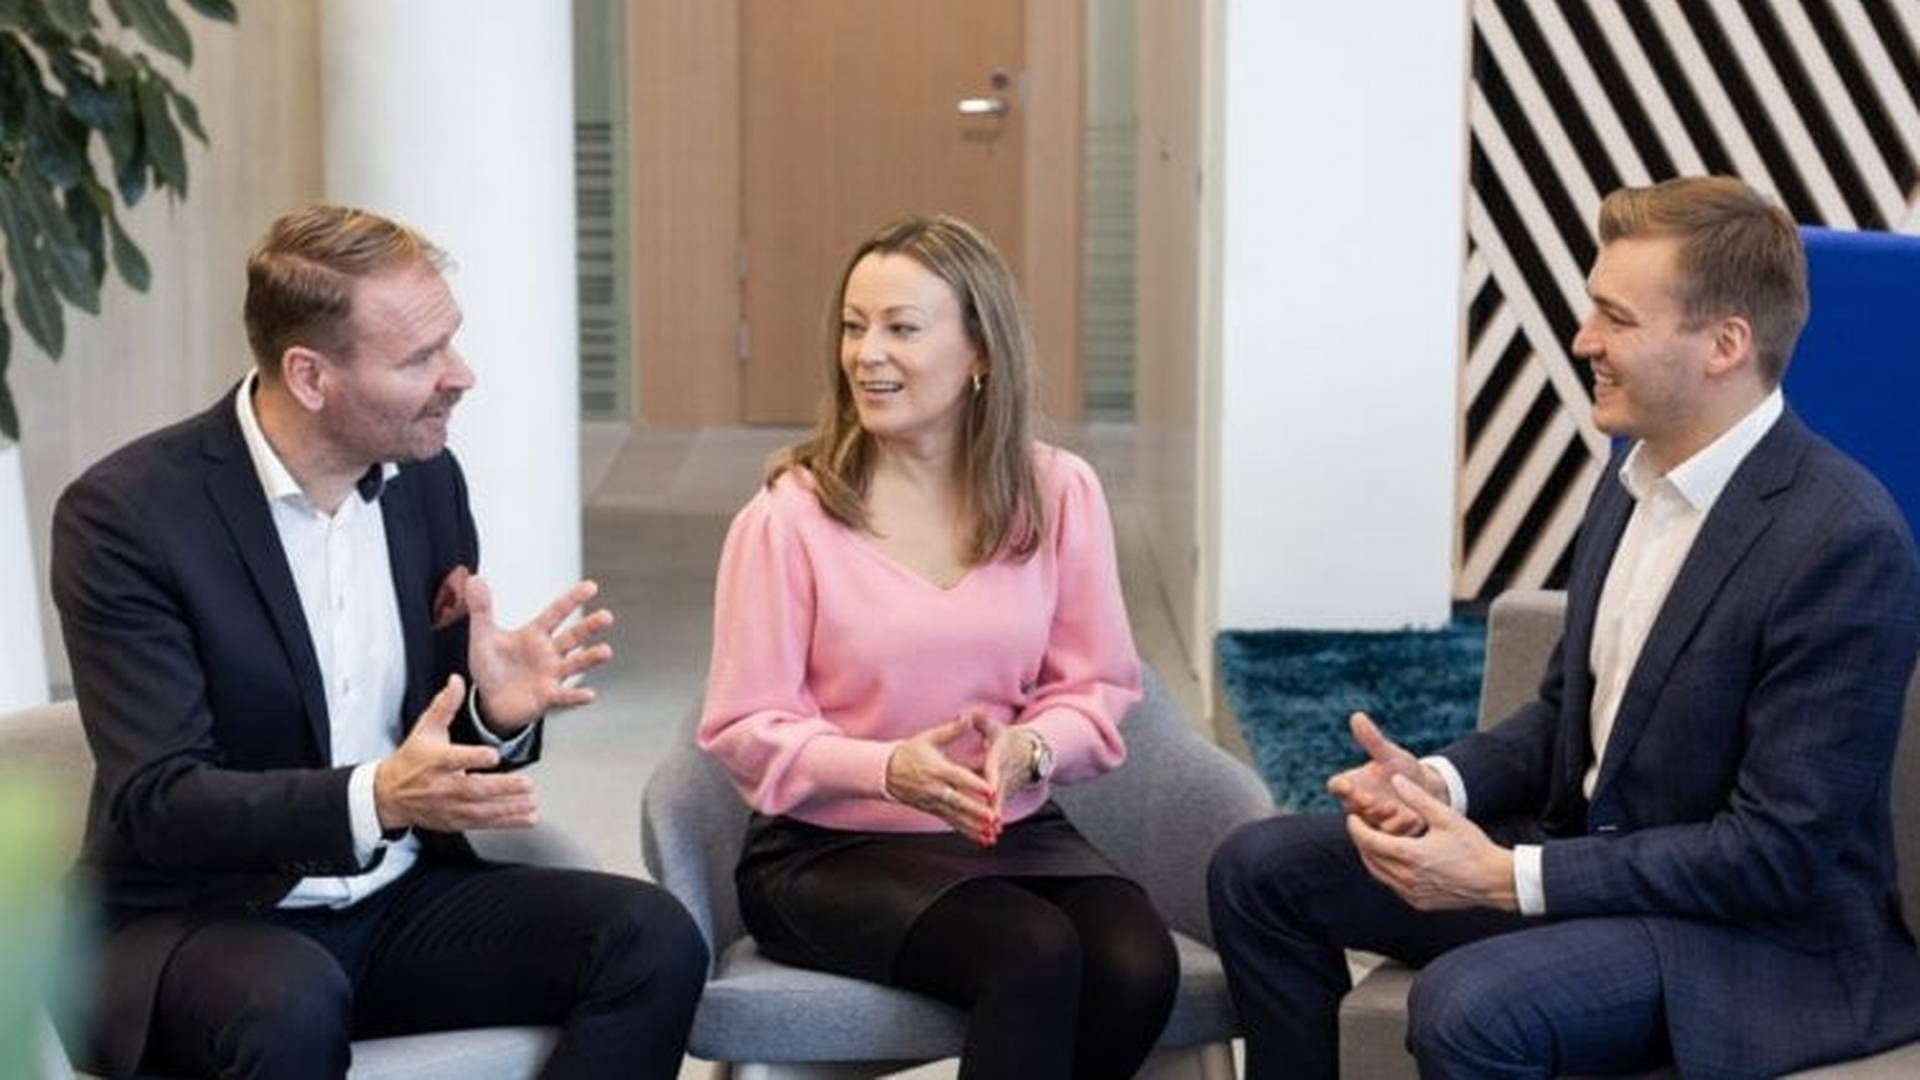 Mike Peltola (right), head of investments and private customers at Handelsbanken Finland, with Nordnet’s country manager for Finland, Suvi Tuppurainen, and Handelsbanken’s head of capital market operations, Finland, Aleksi Lankinen (right). | Photo: Handelsbanken / Nordnet / PR